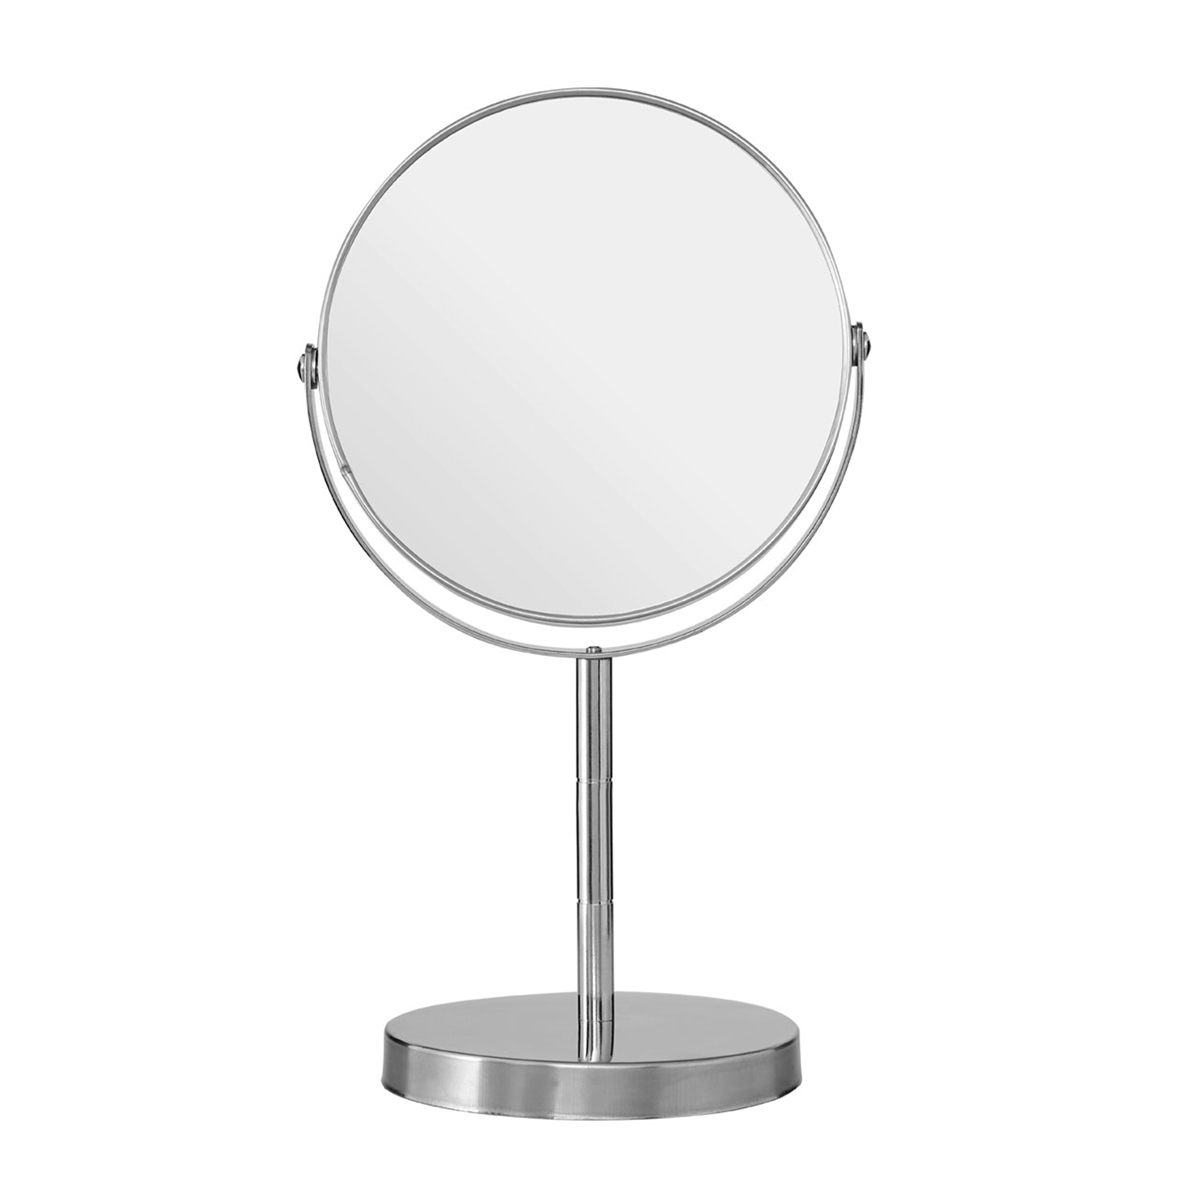 Accents Chrome small freestanding vanity mirror with 2x magnification